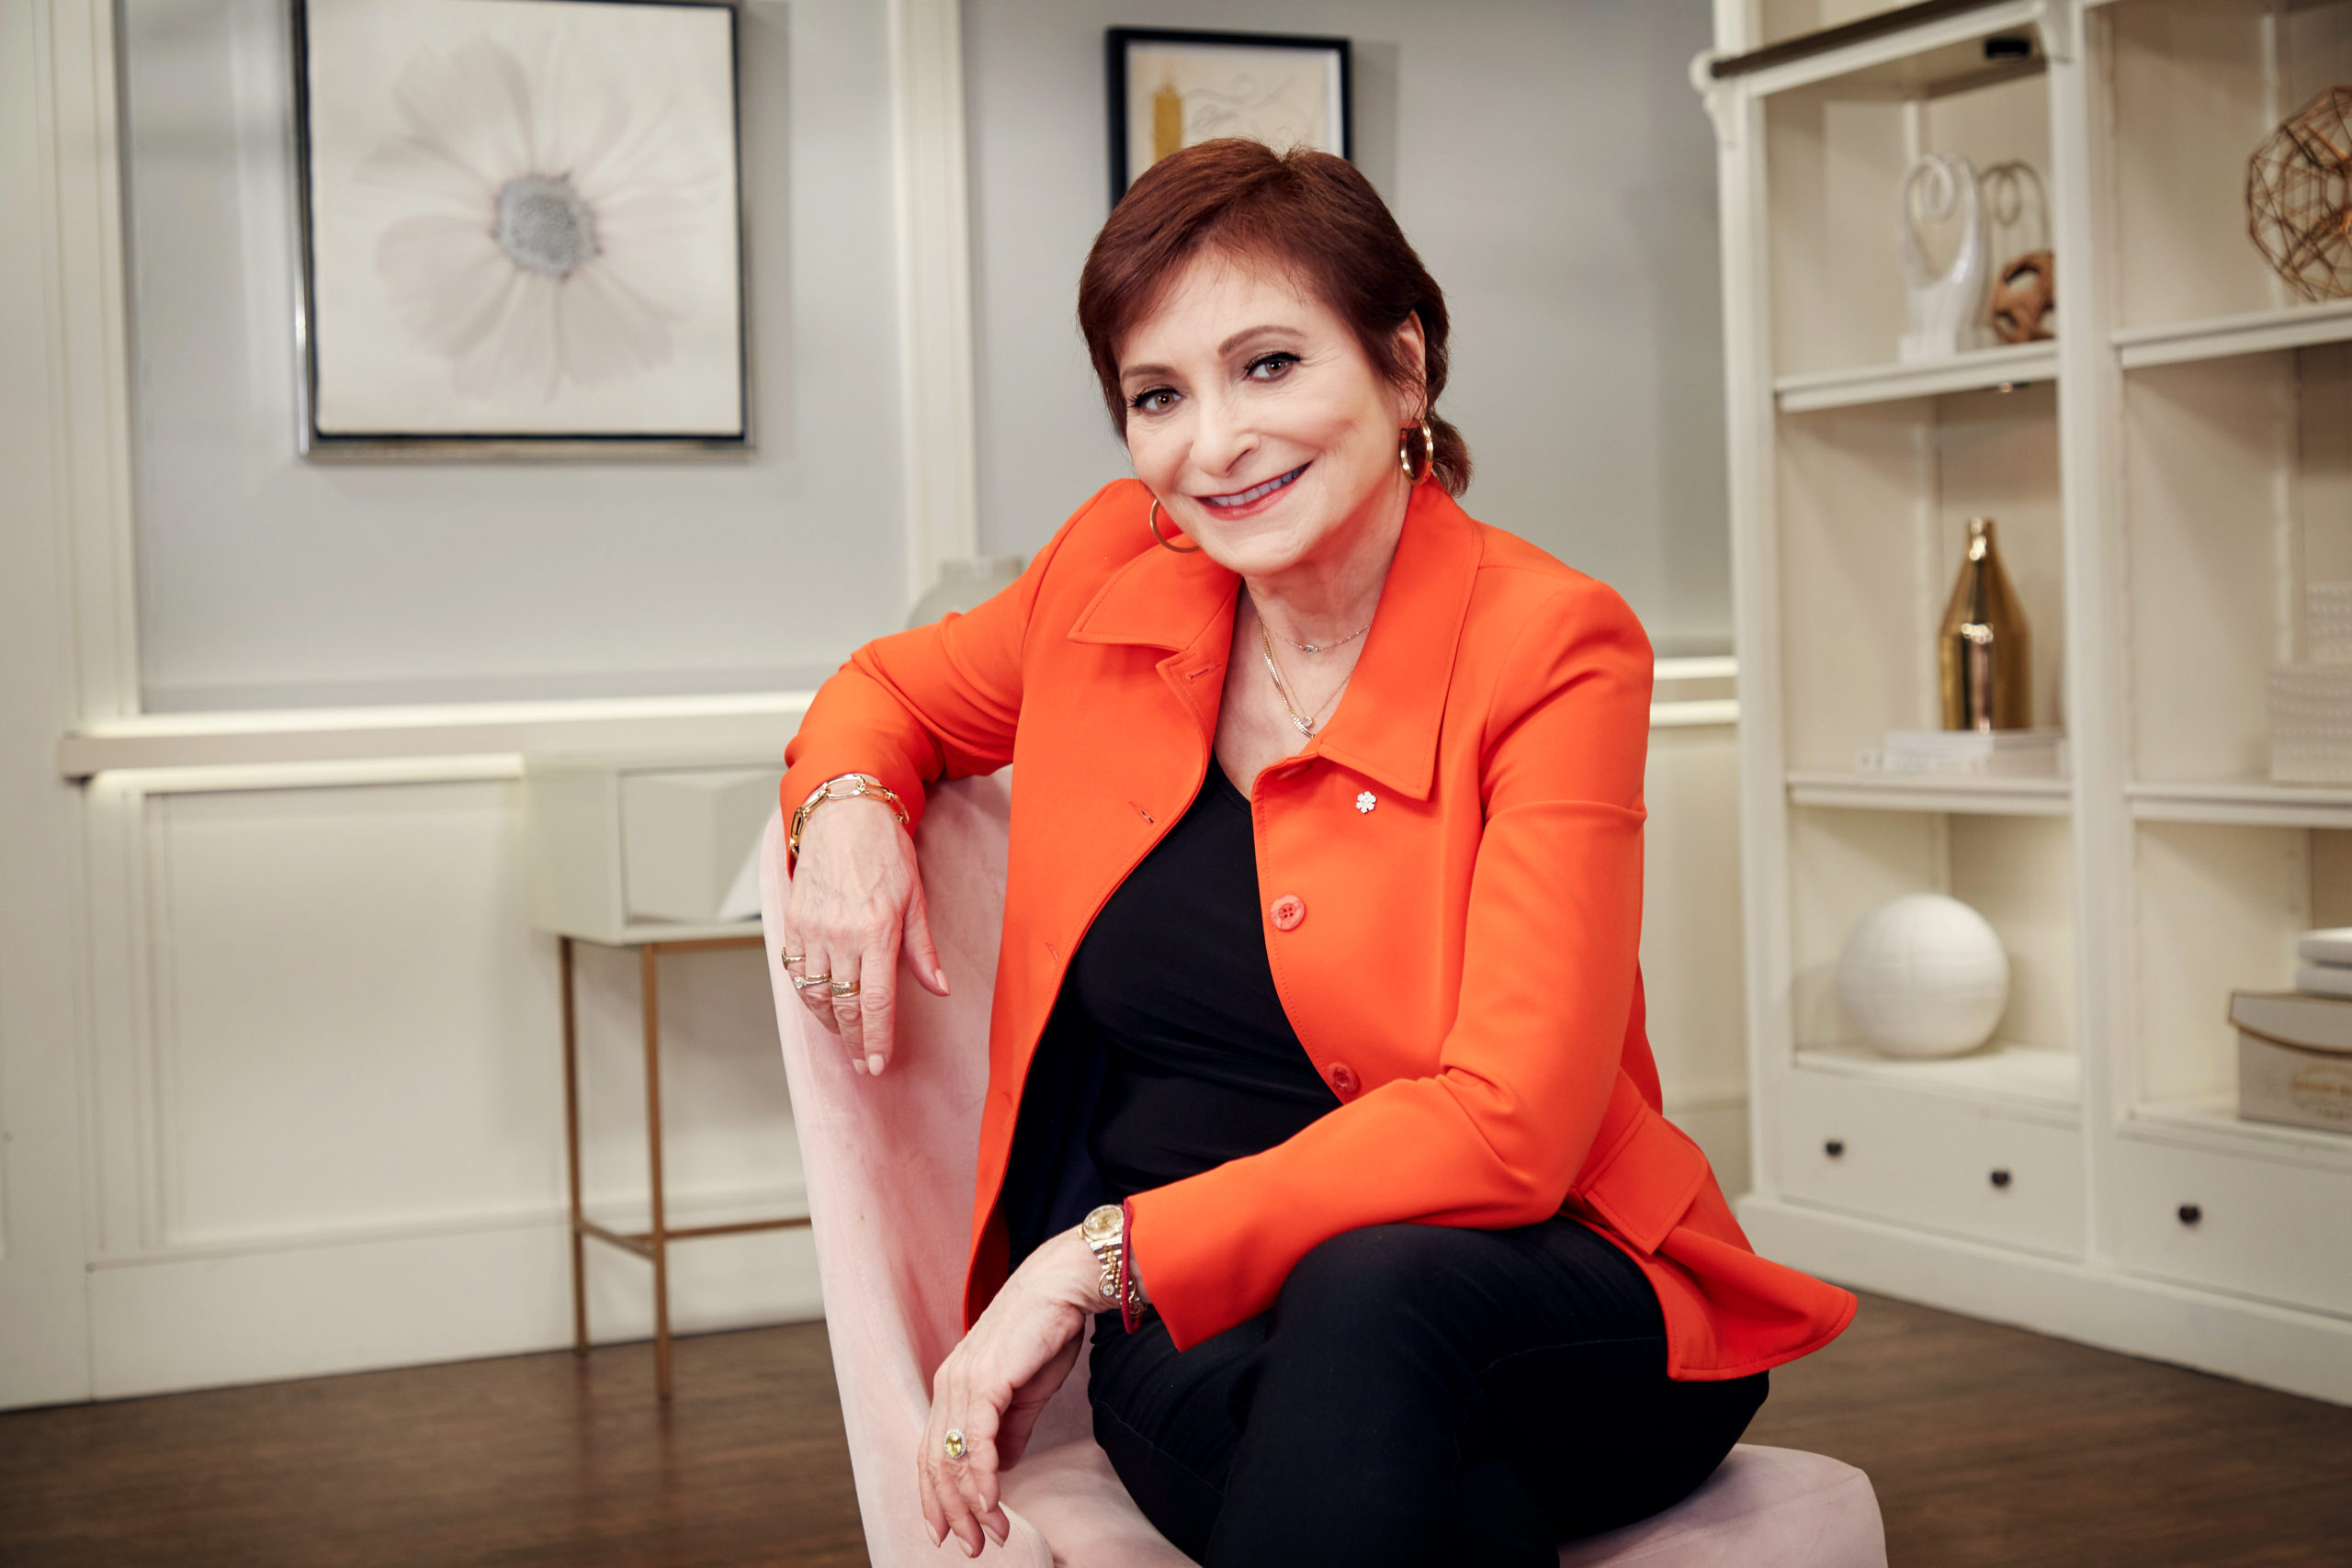 A woman sitting in a pink chair. She has short red hair and is wearing black pants and top with a bright orange suit jacket.